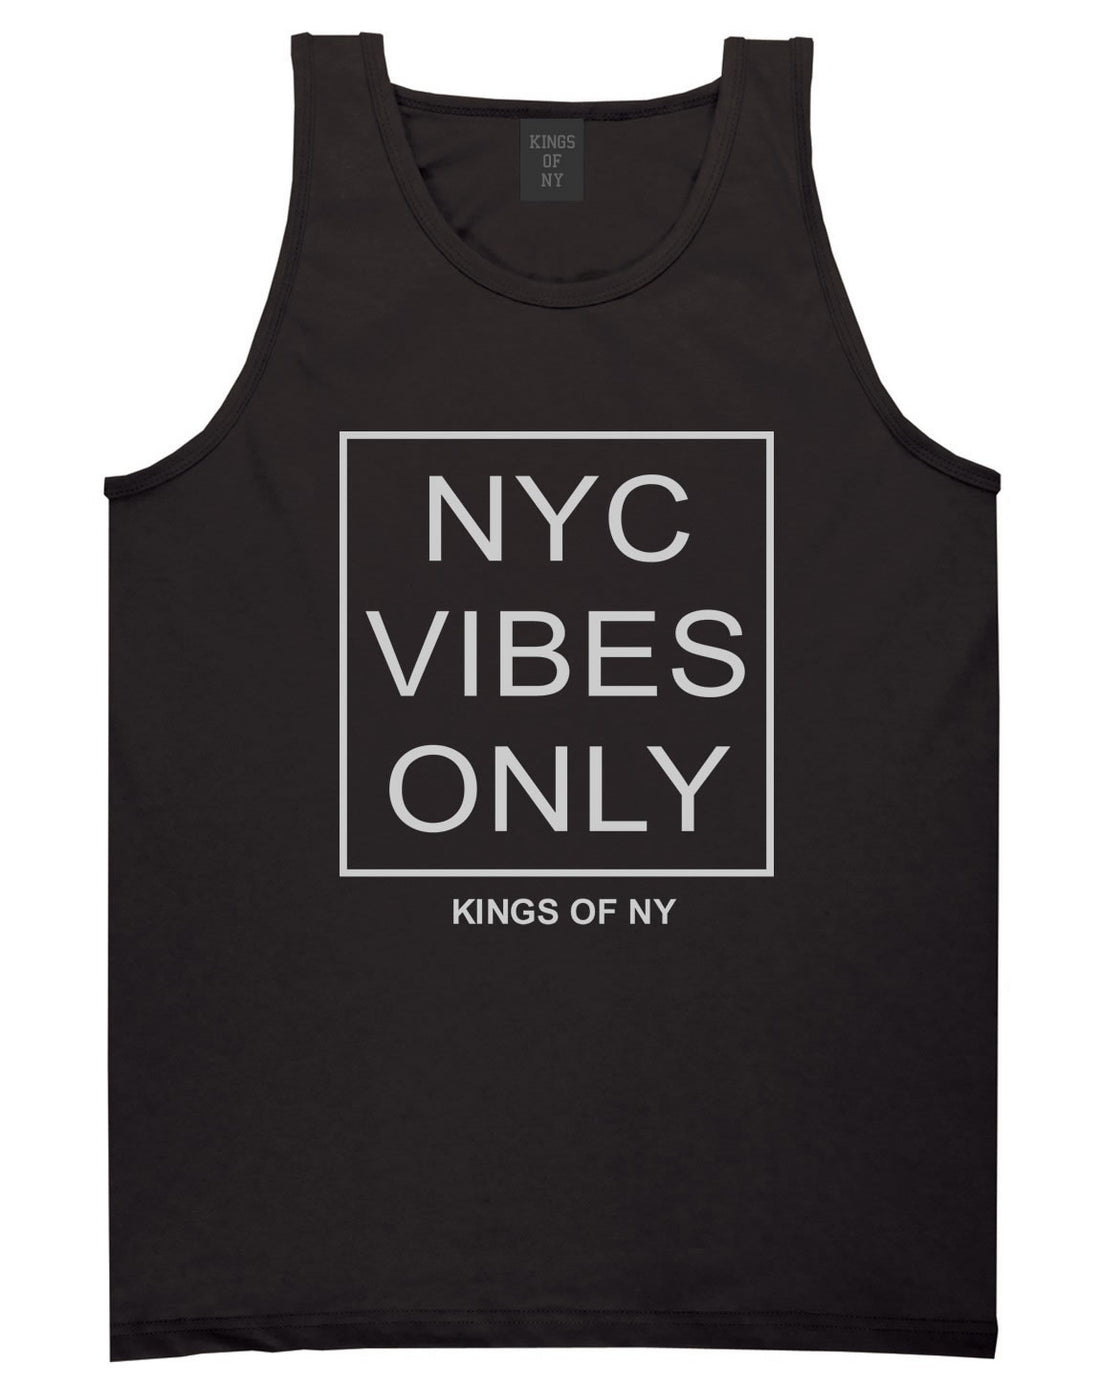 NYC Vibes Only Good Tank Top